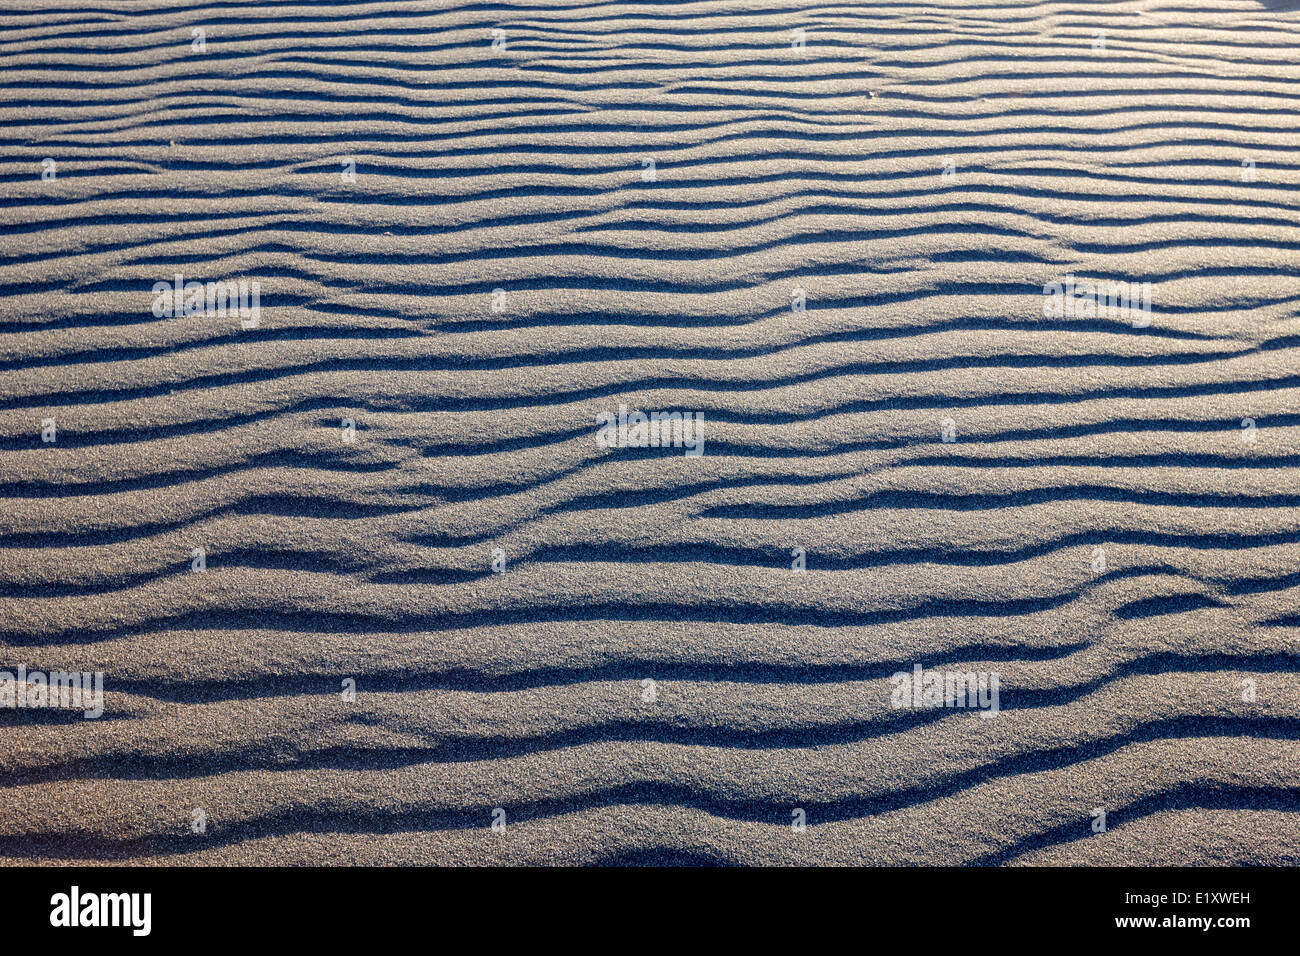 tidal ripples in sandy beach on the pacific ocean los pellines chile Stock Photo